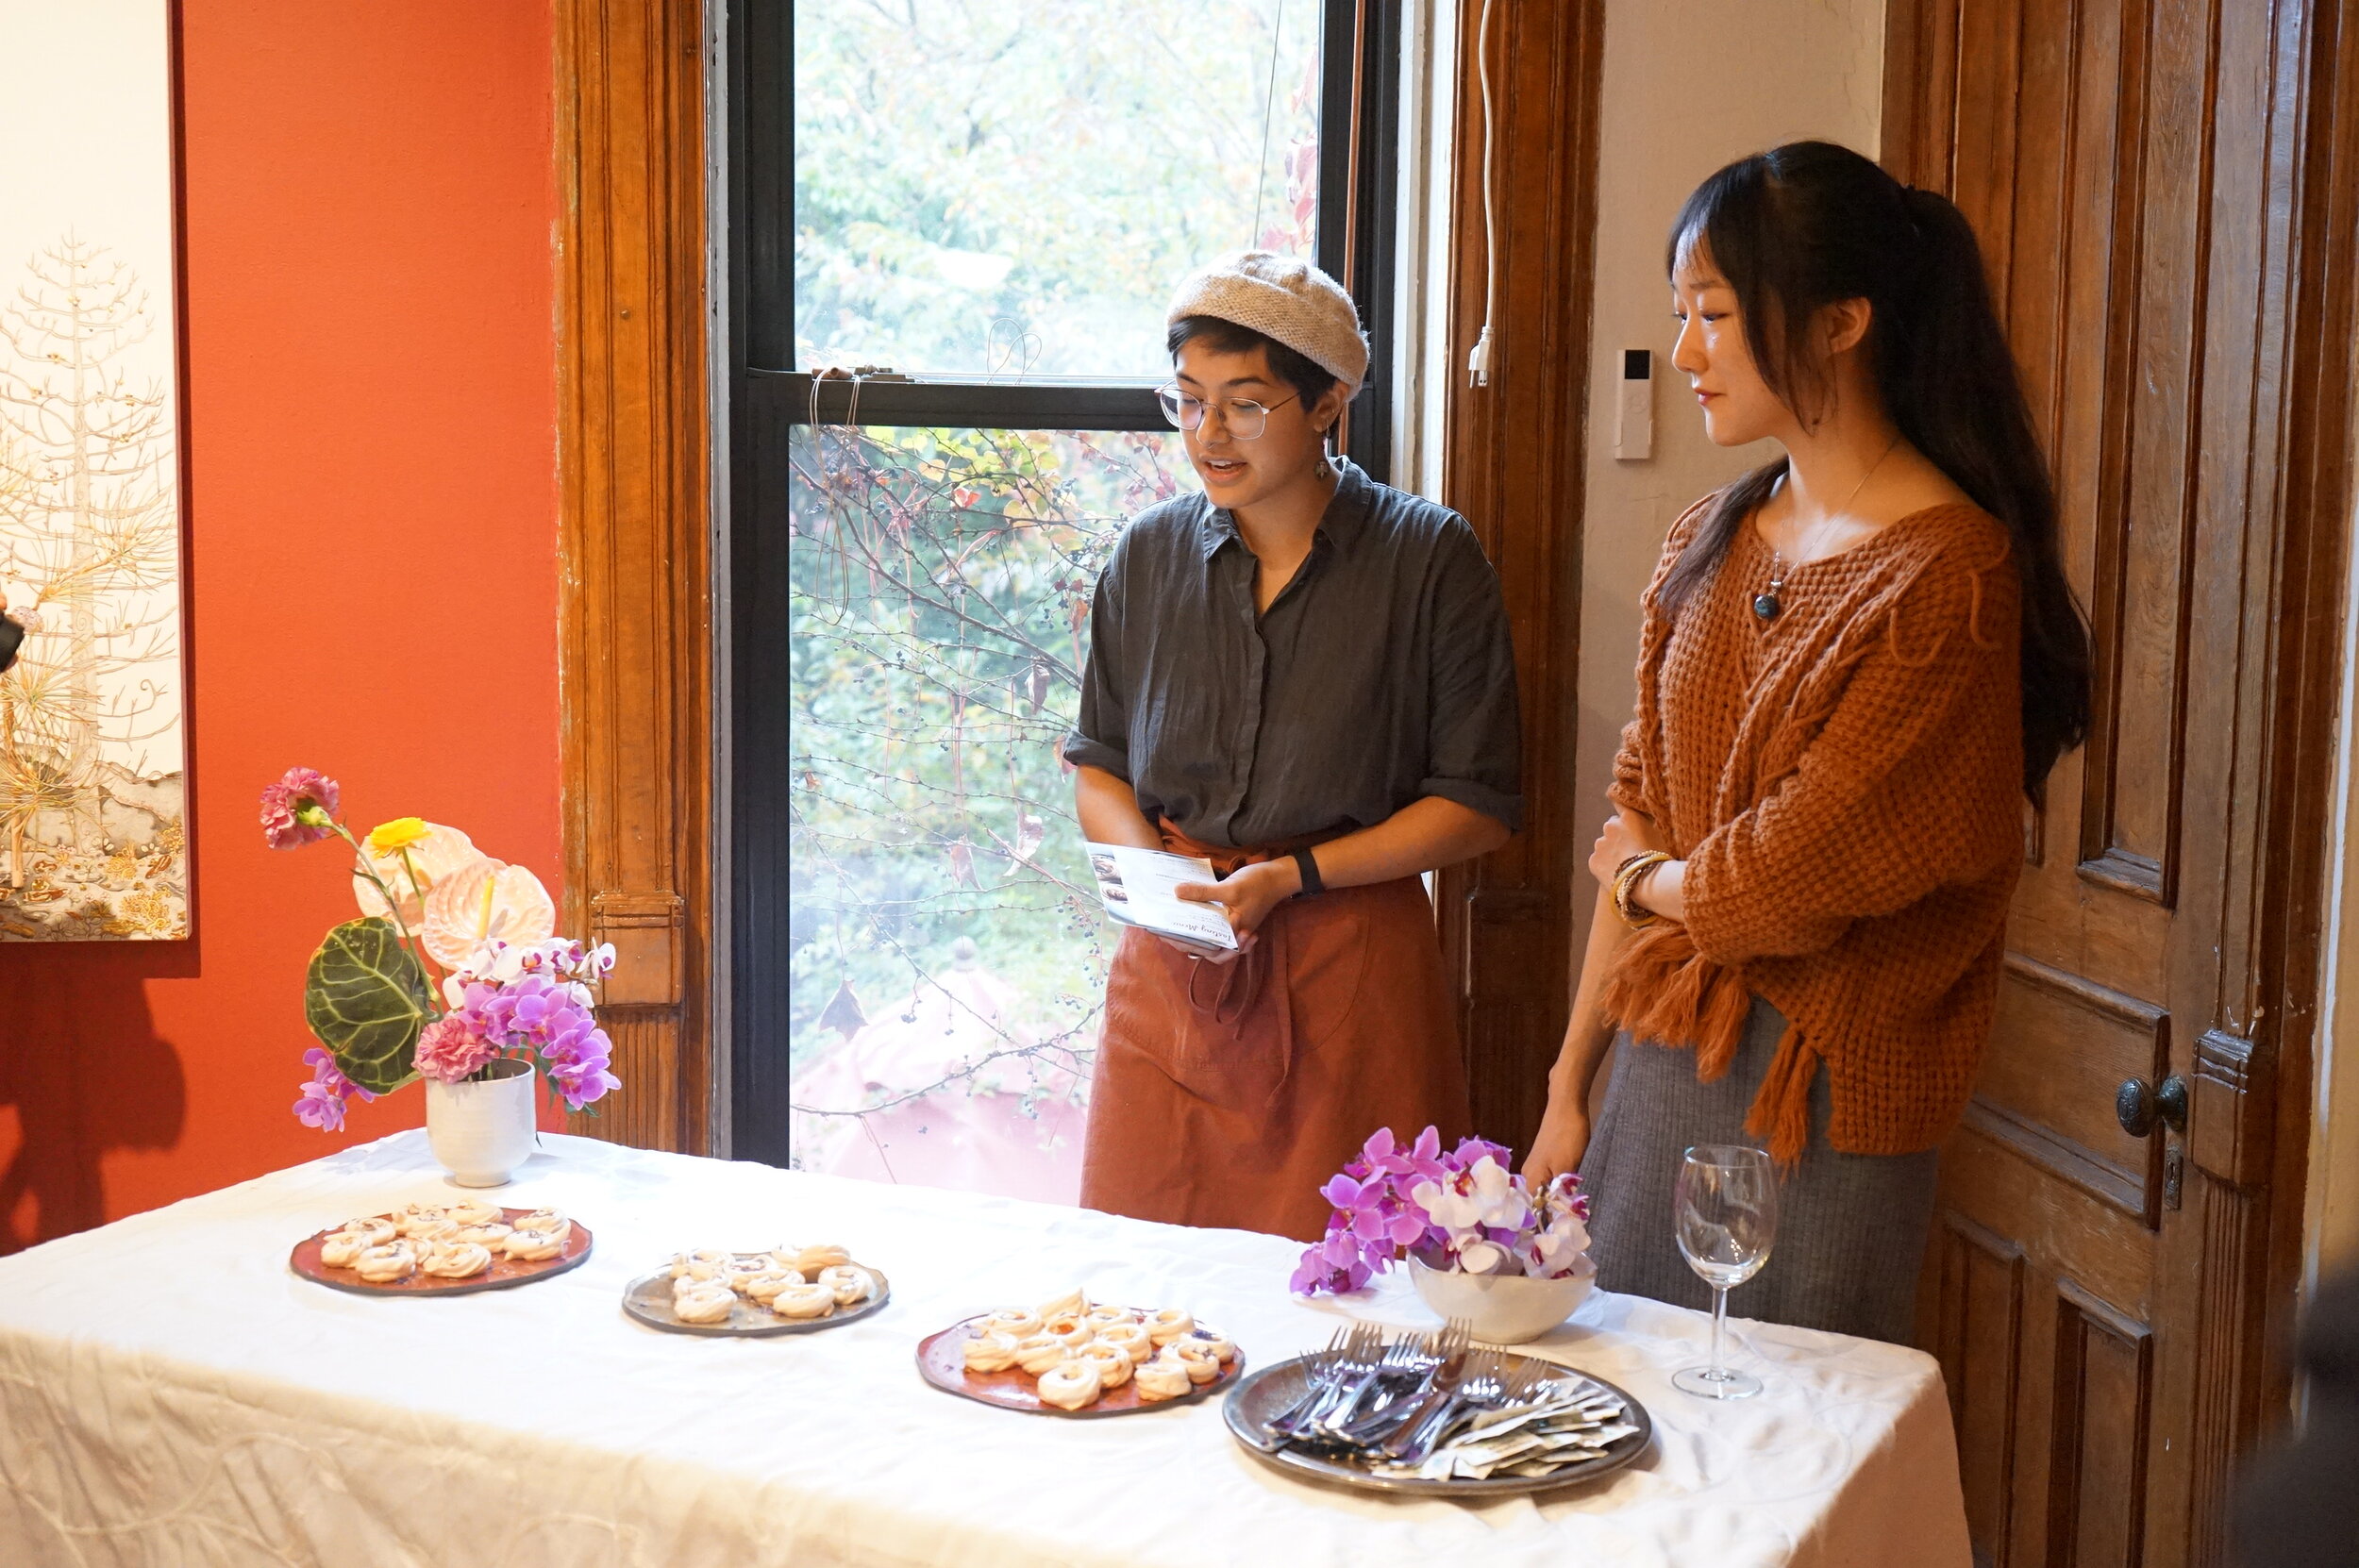   Between Earth and Falling Leaves  - Dessert Tasting Party, photo by Yilan Wang, courtesy Fou Gallery. 